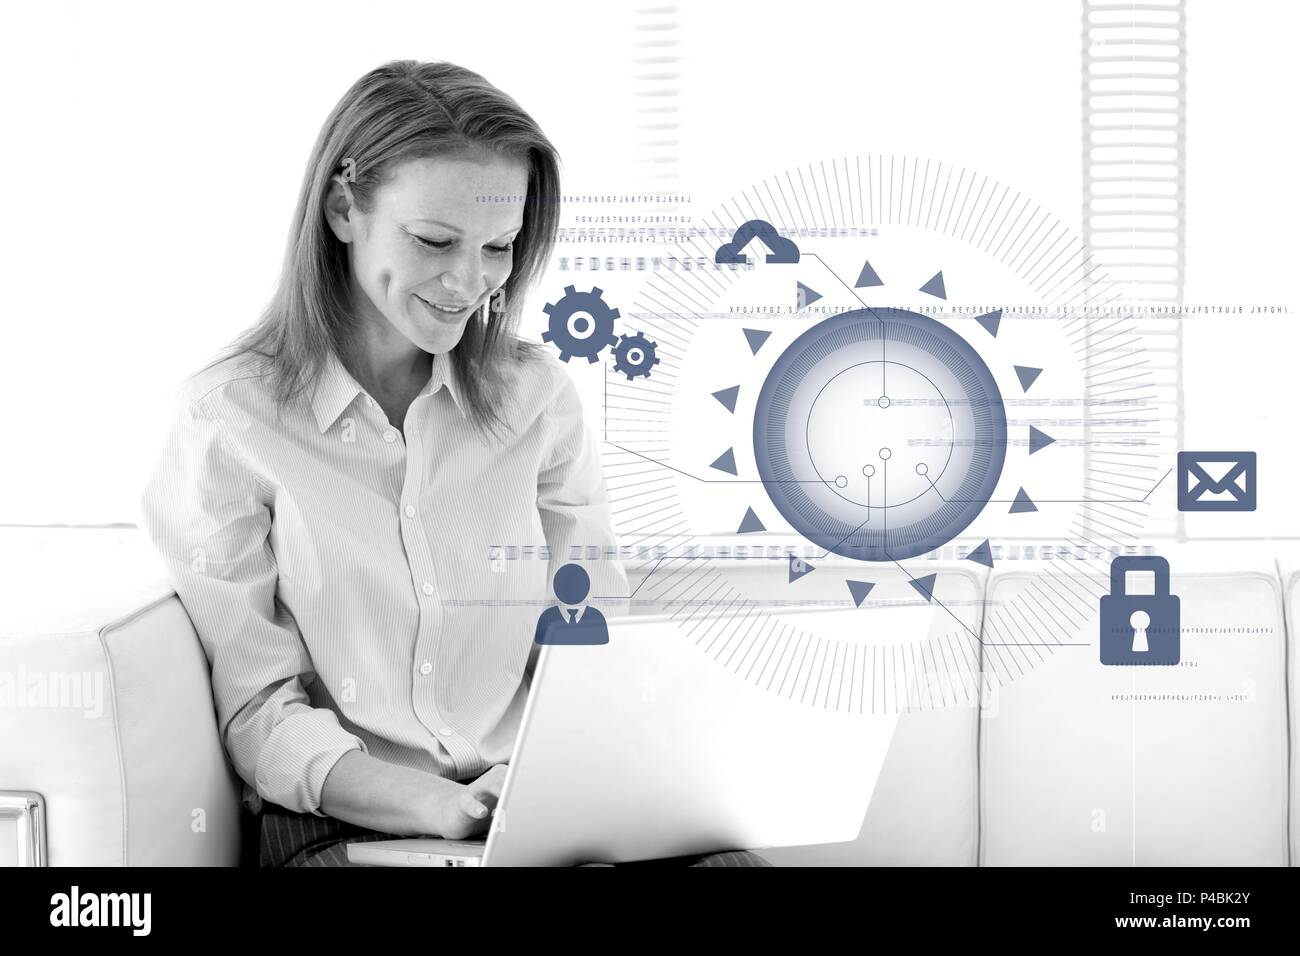 Composite image with woman working on laptop with digital icons Stock Photo